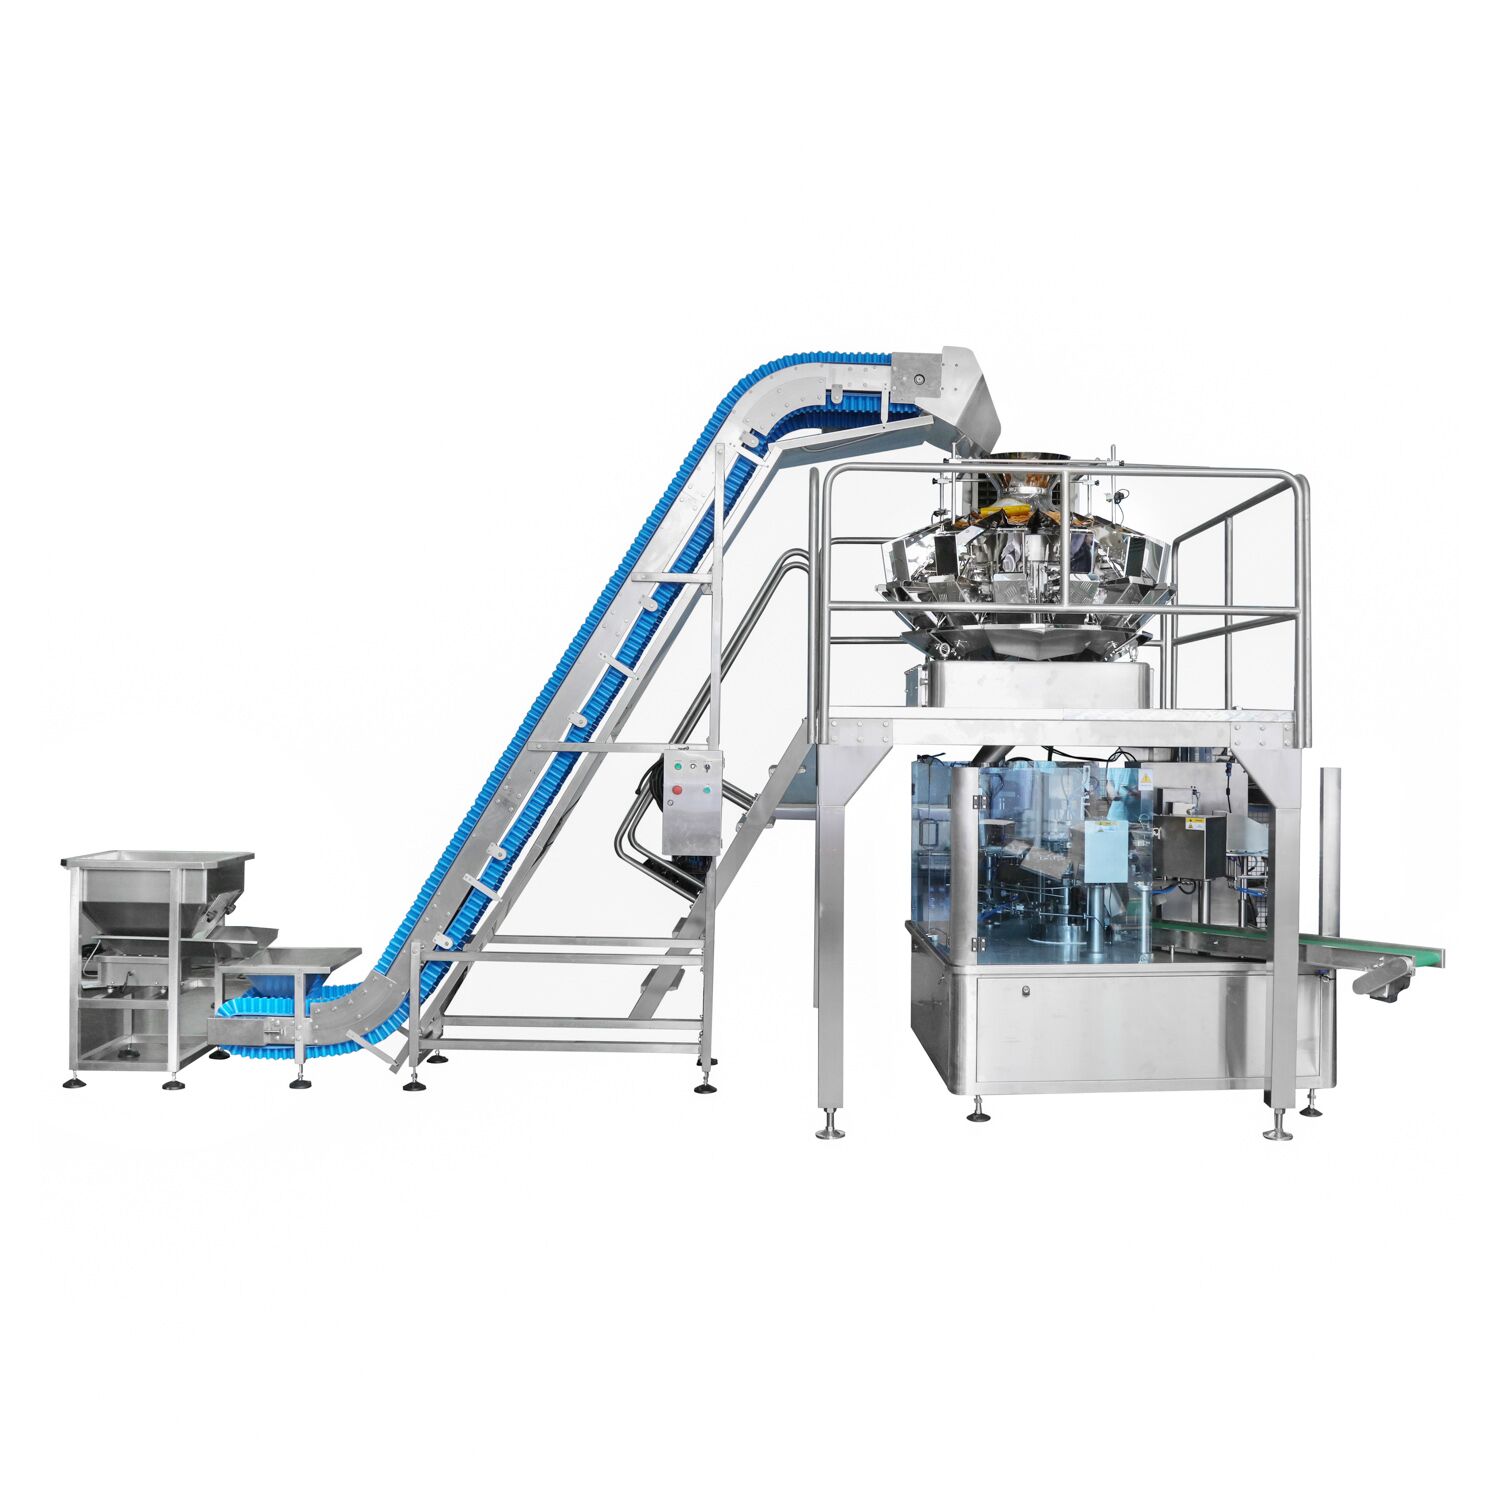 VFFS The advantages of weighing automatic packaging machine